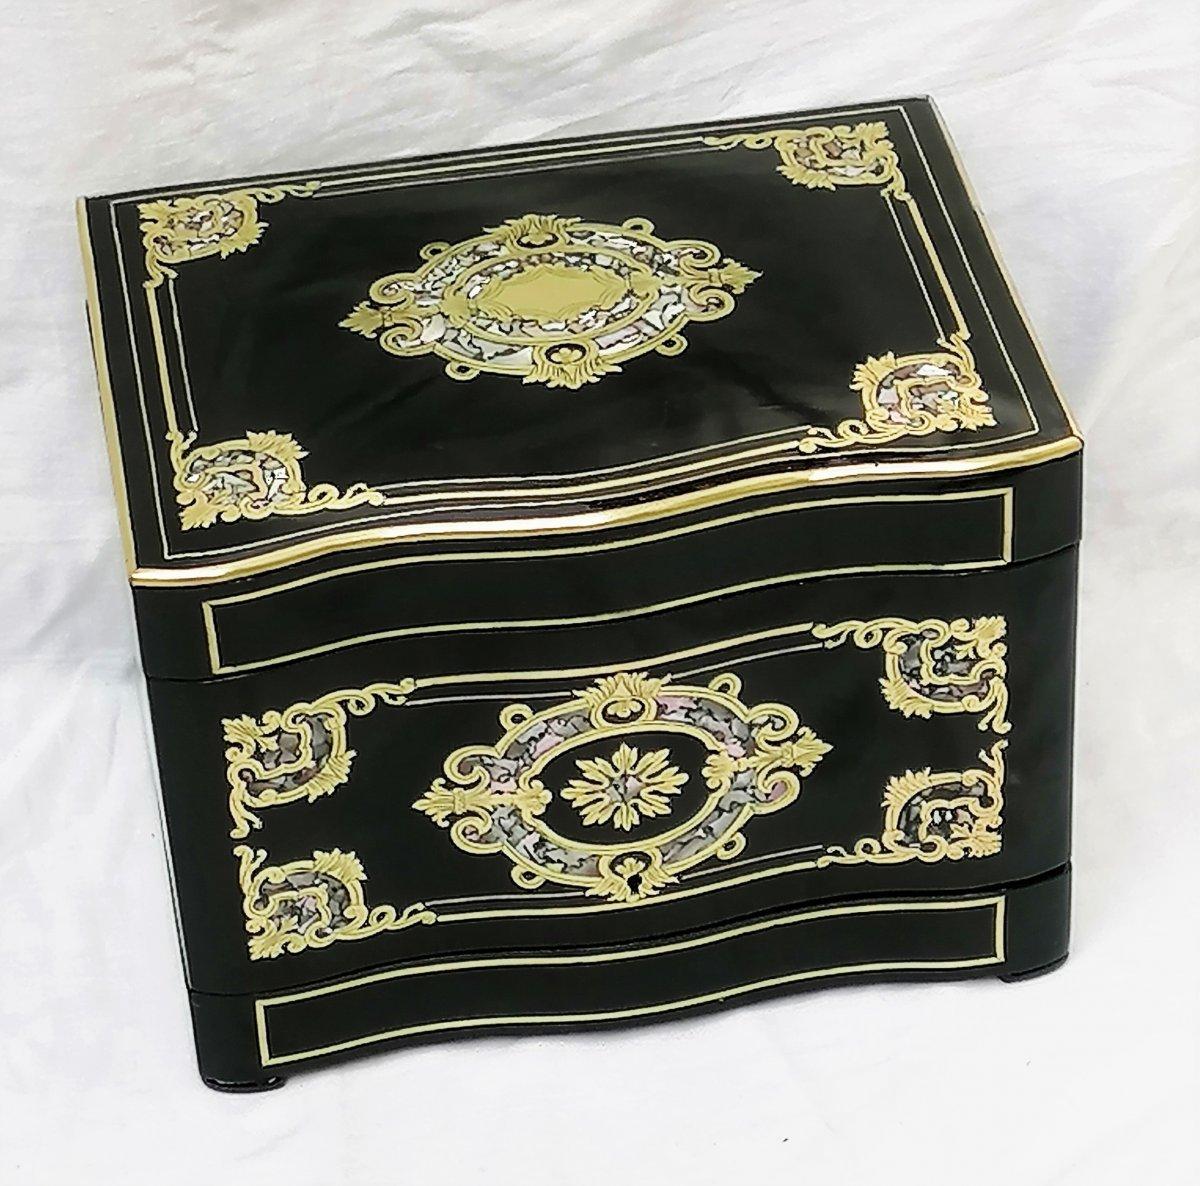 Napoleon III liquor cellar in Boulle style marquetry made in blackened fruitwood with marquetry inlays and brass cartridges and mother of pearl.
Servant in mahogany and bronze which offers a liqueur service in Baccarat crystal model Harcourt arched